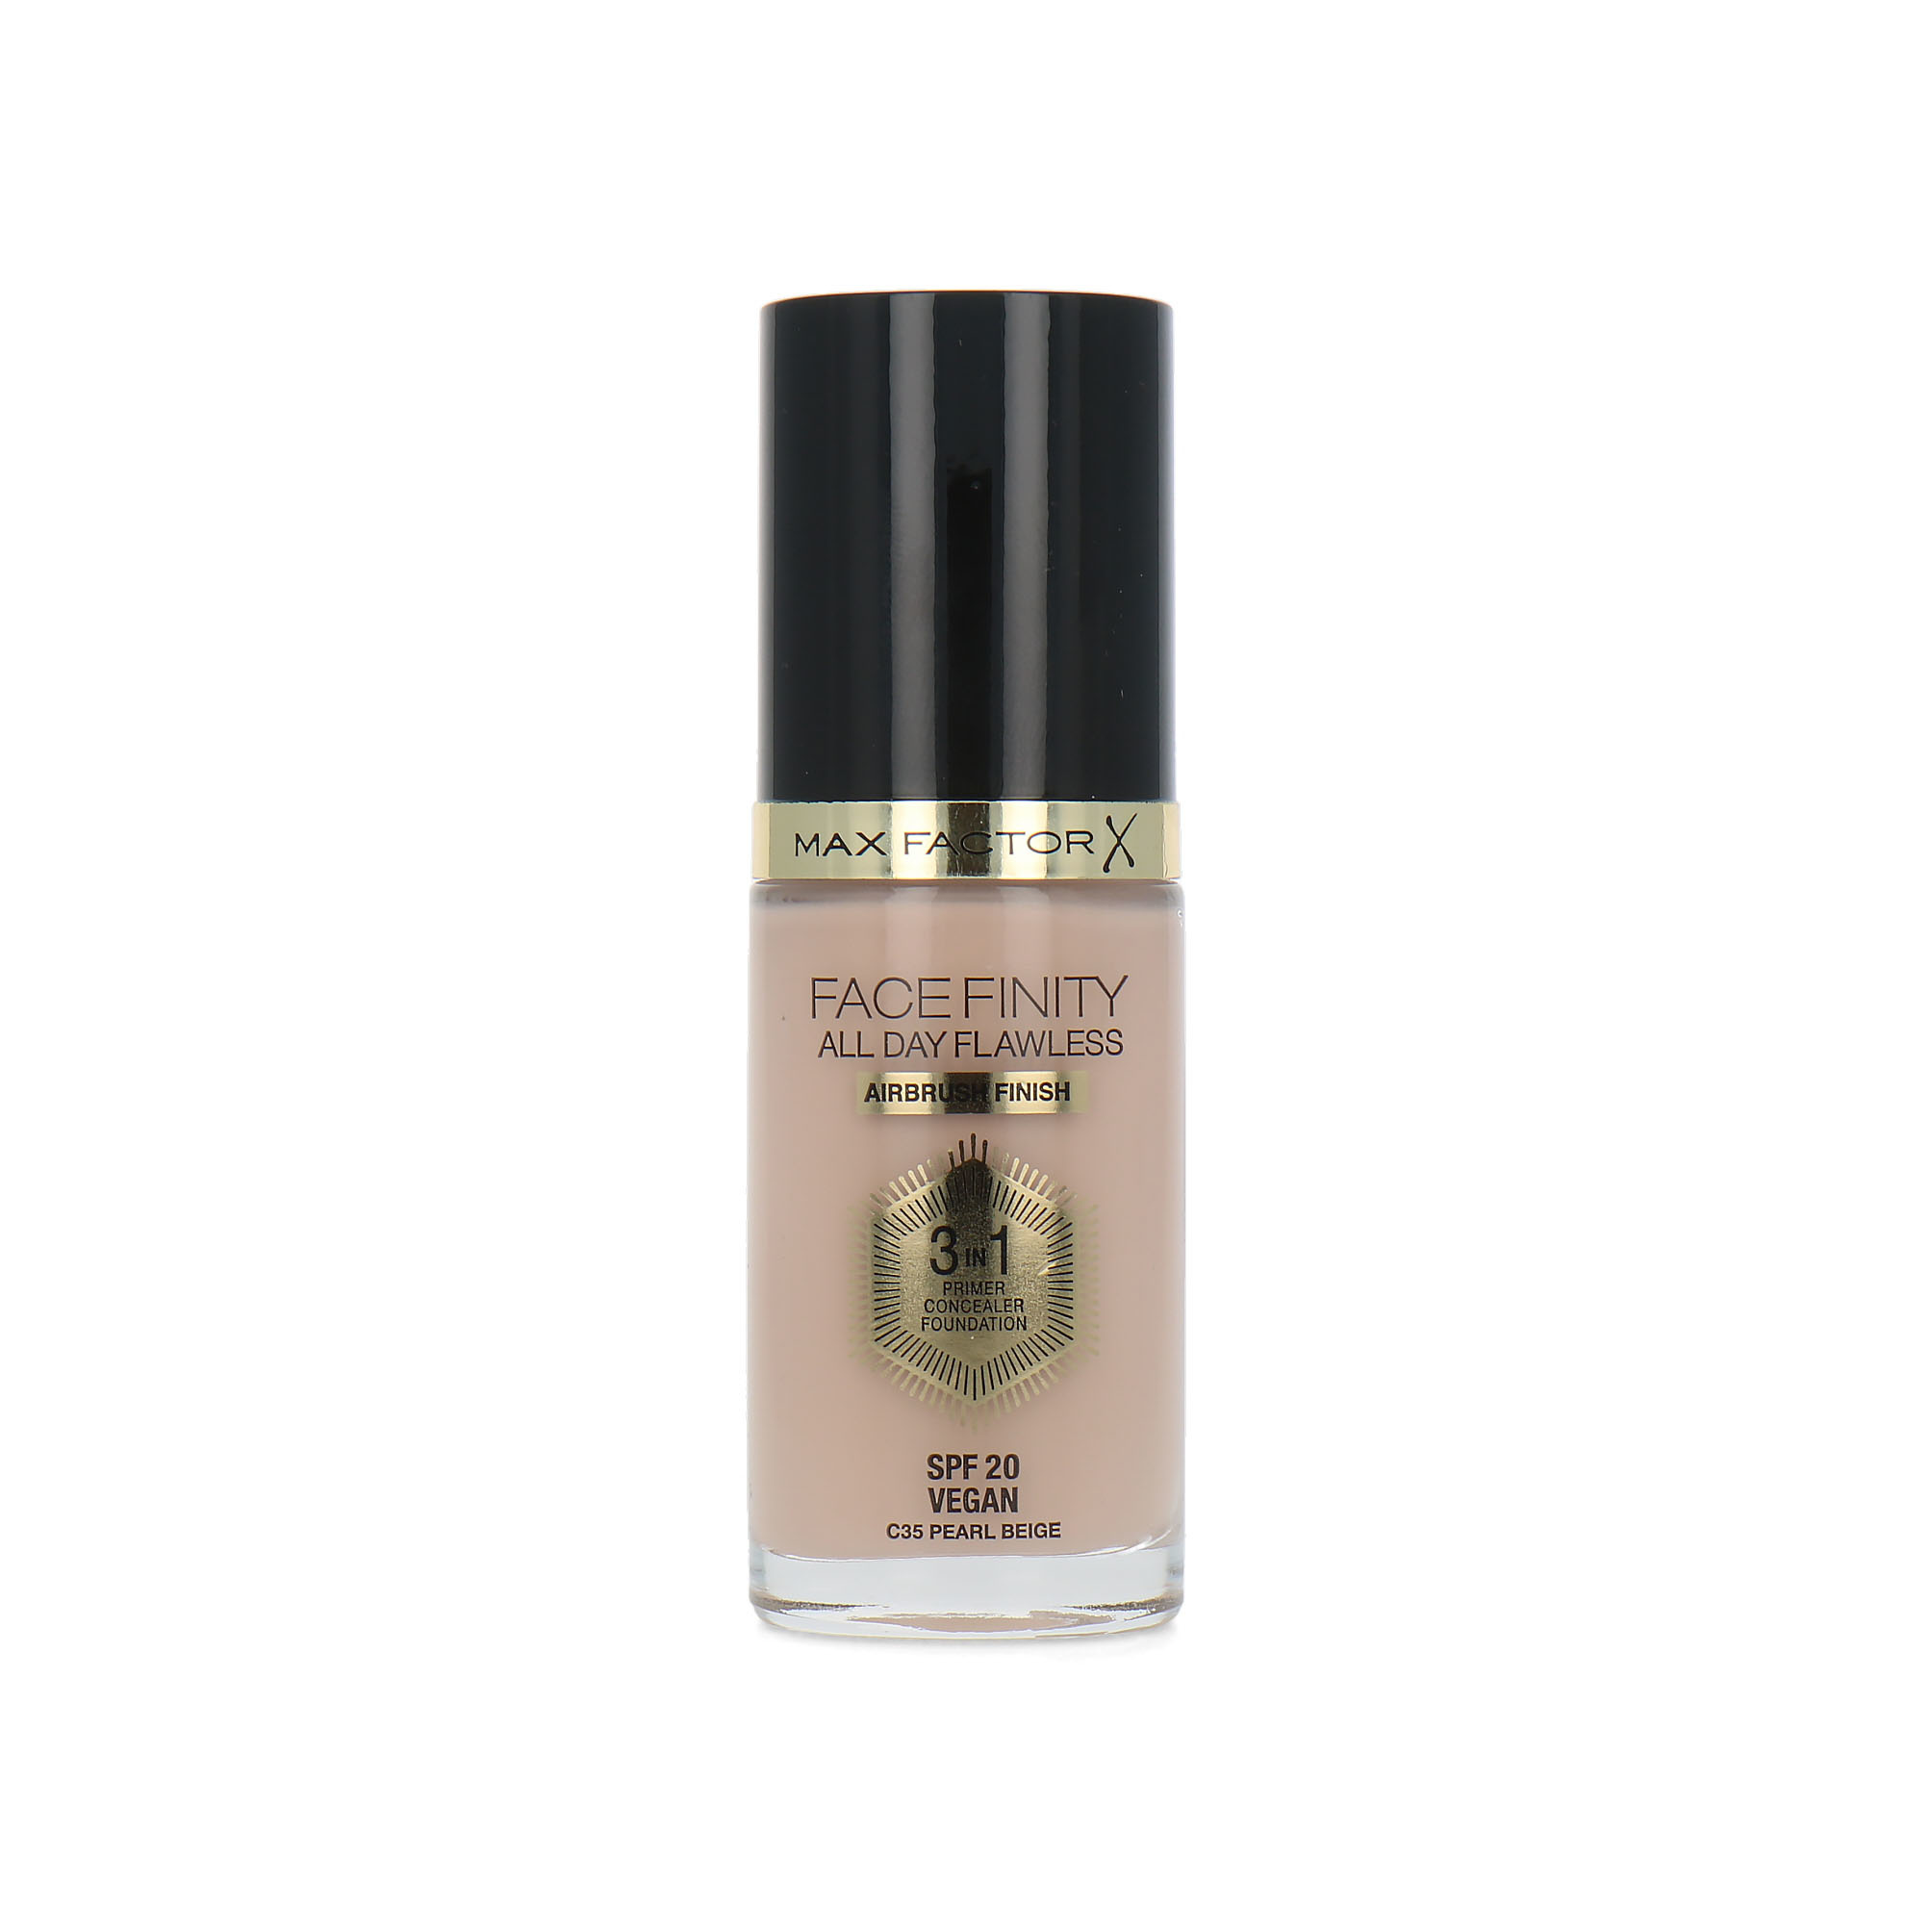 Max Factor Facefinity All Day Flawless 3 in 1 Airbrush Finish Fond de teint - C35 Pearl Beige